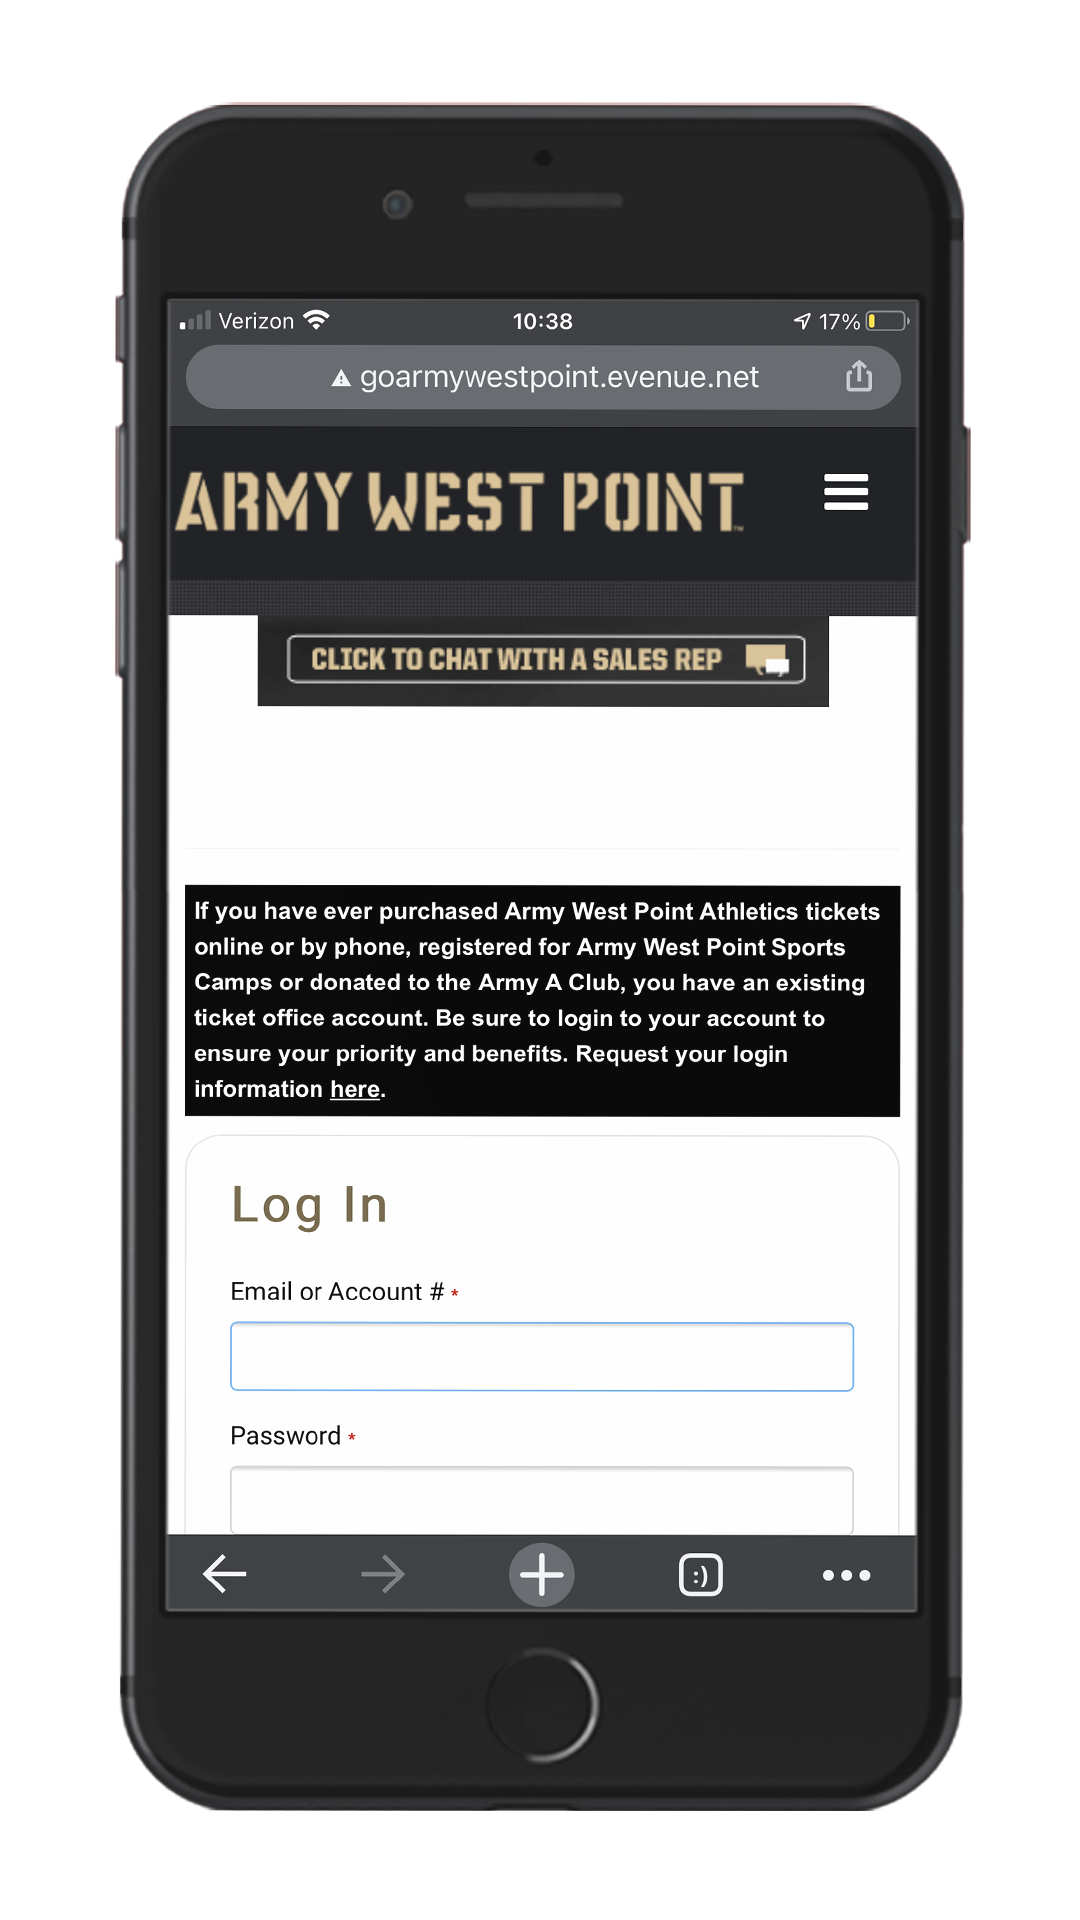 Your army login